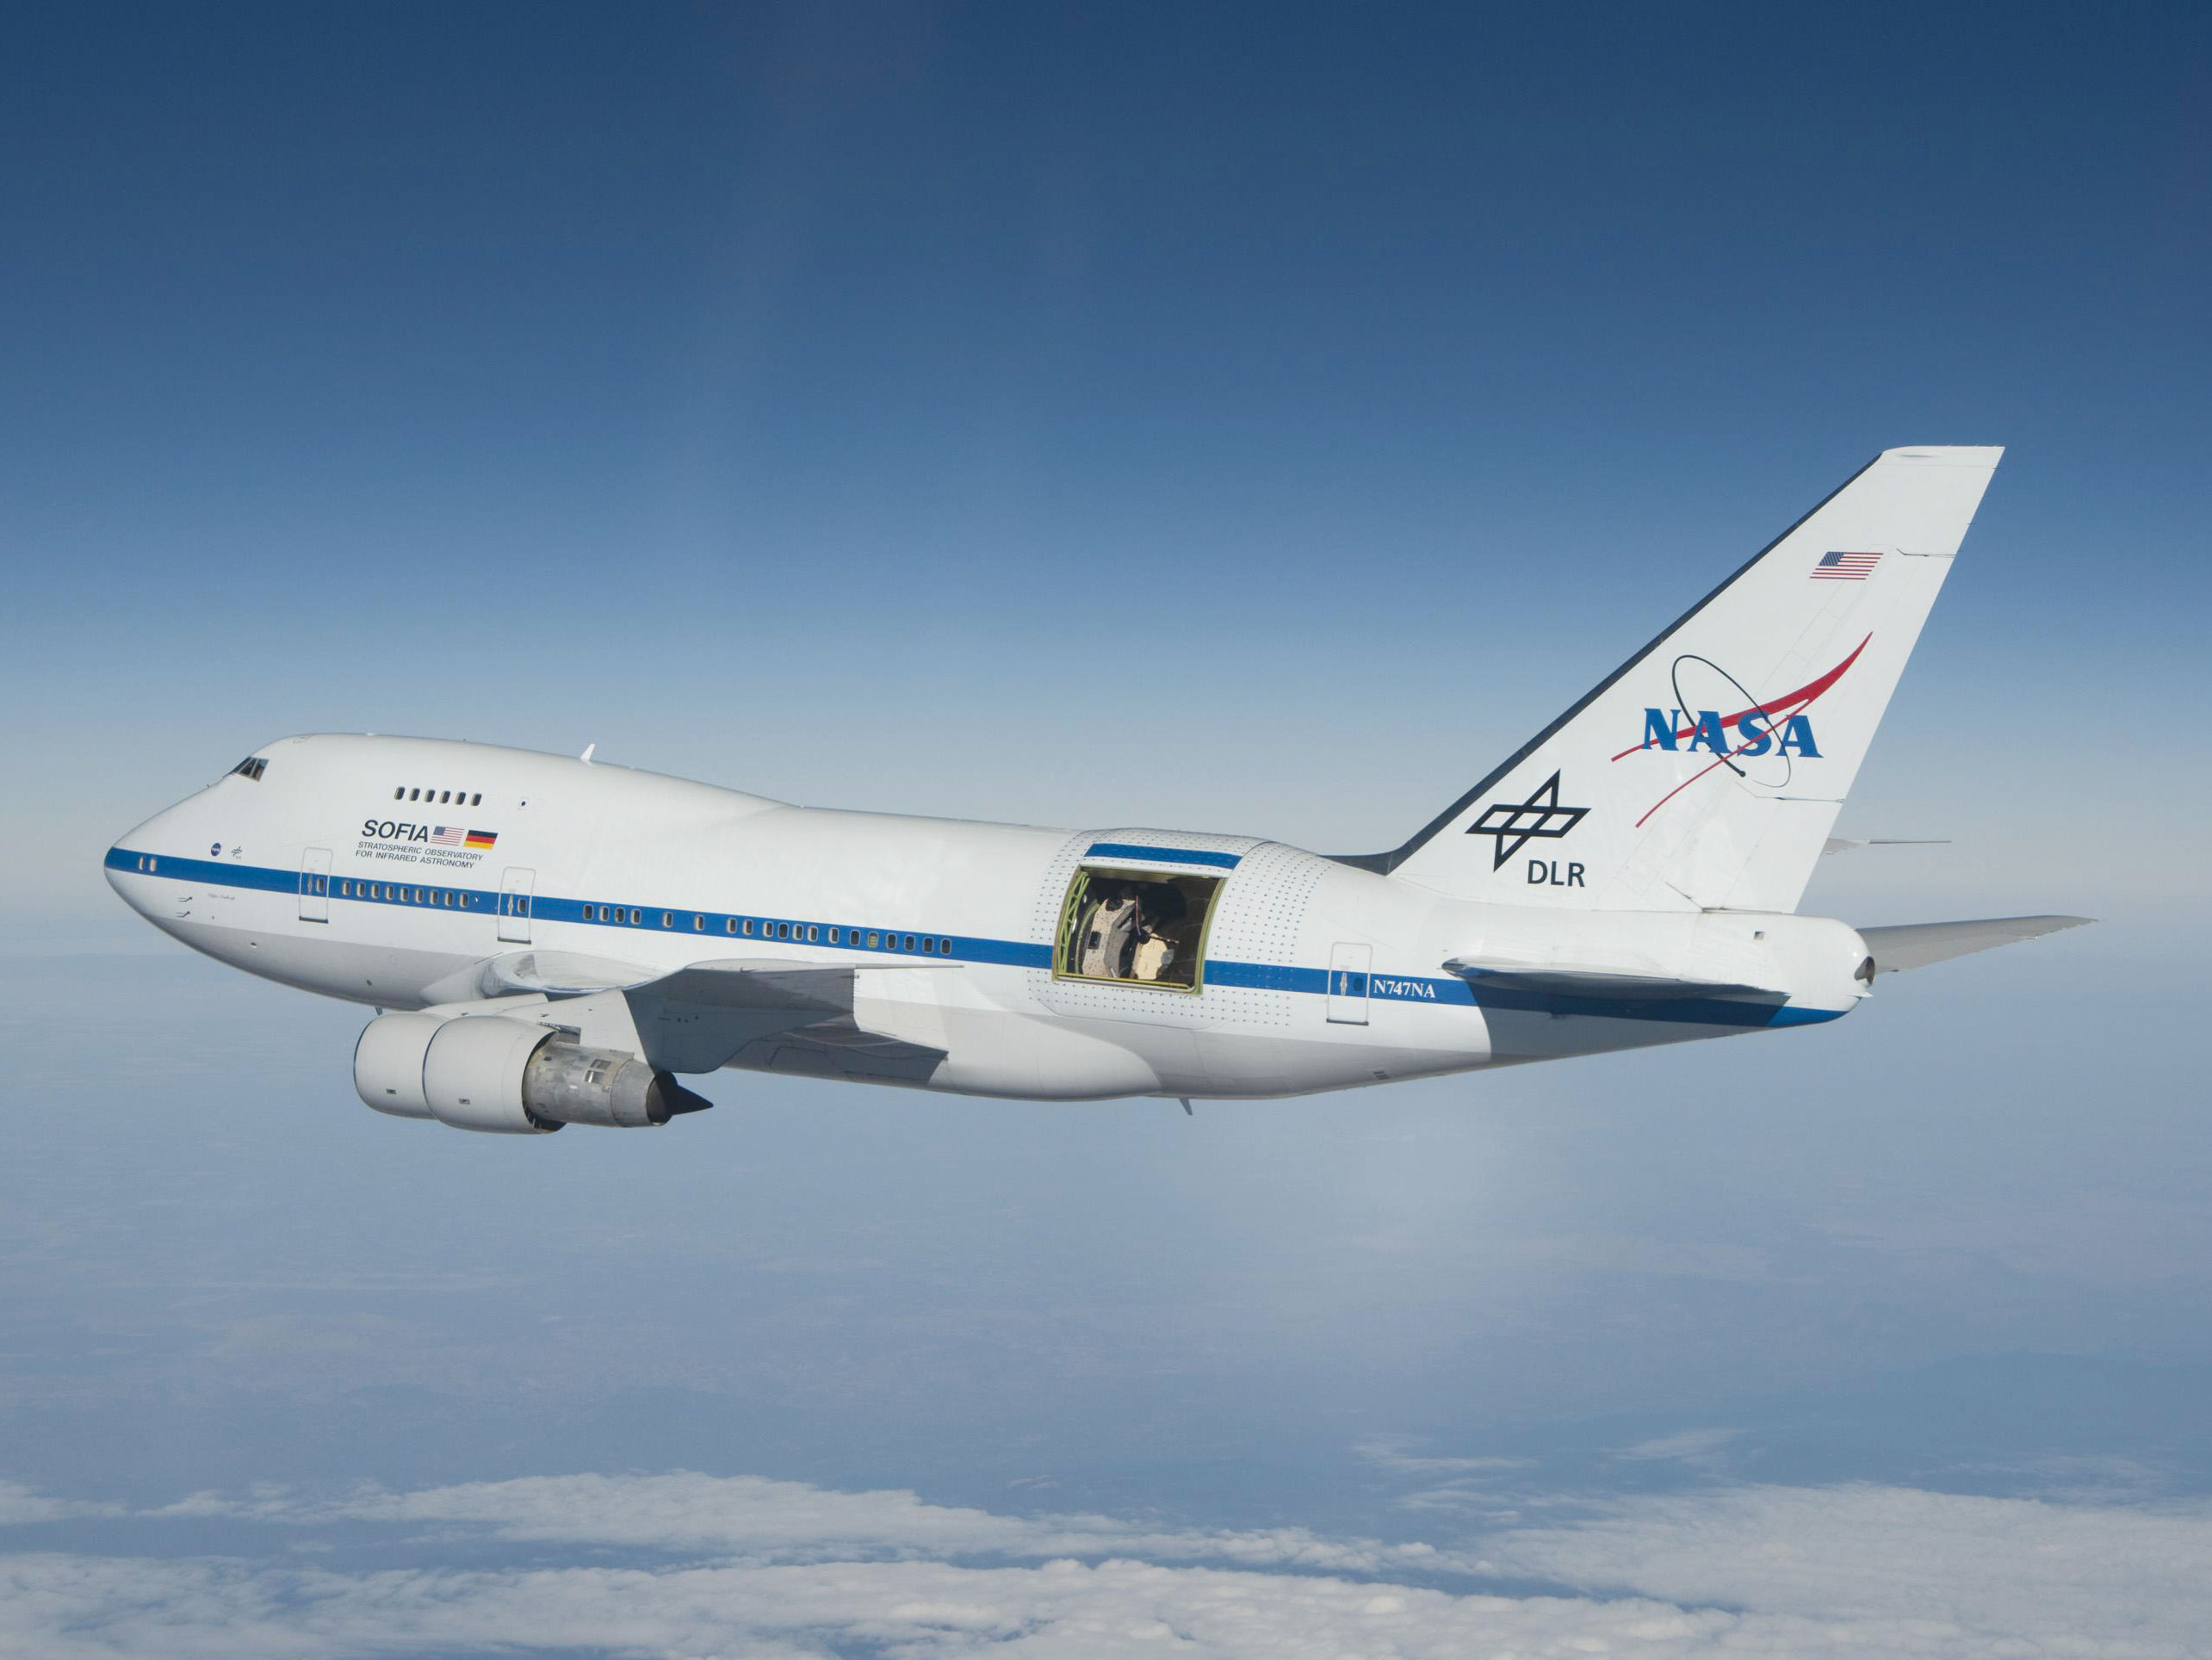 Astronomers want “strong finish” for SOFIA